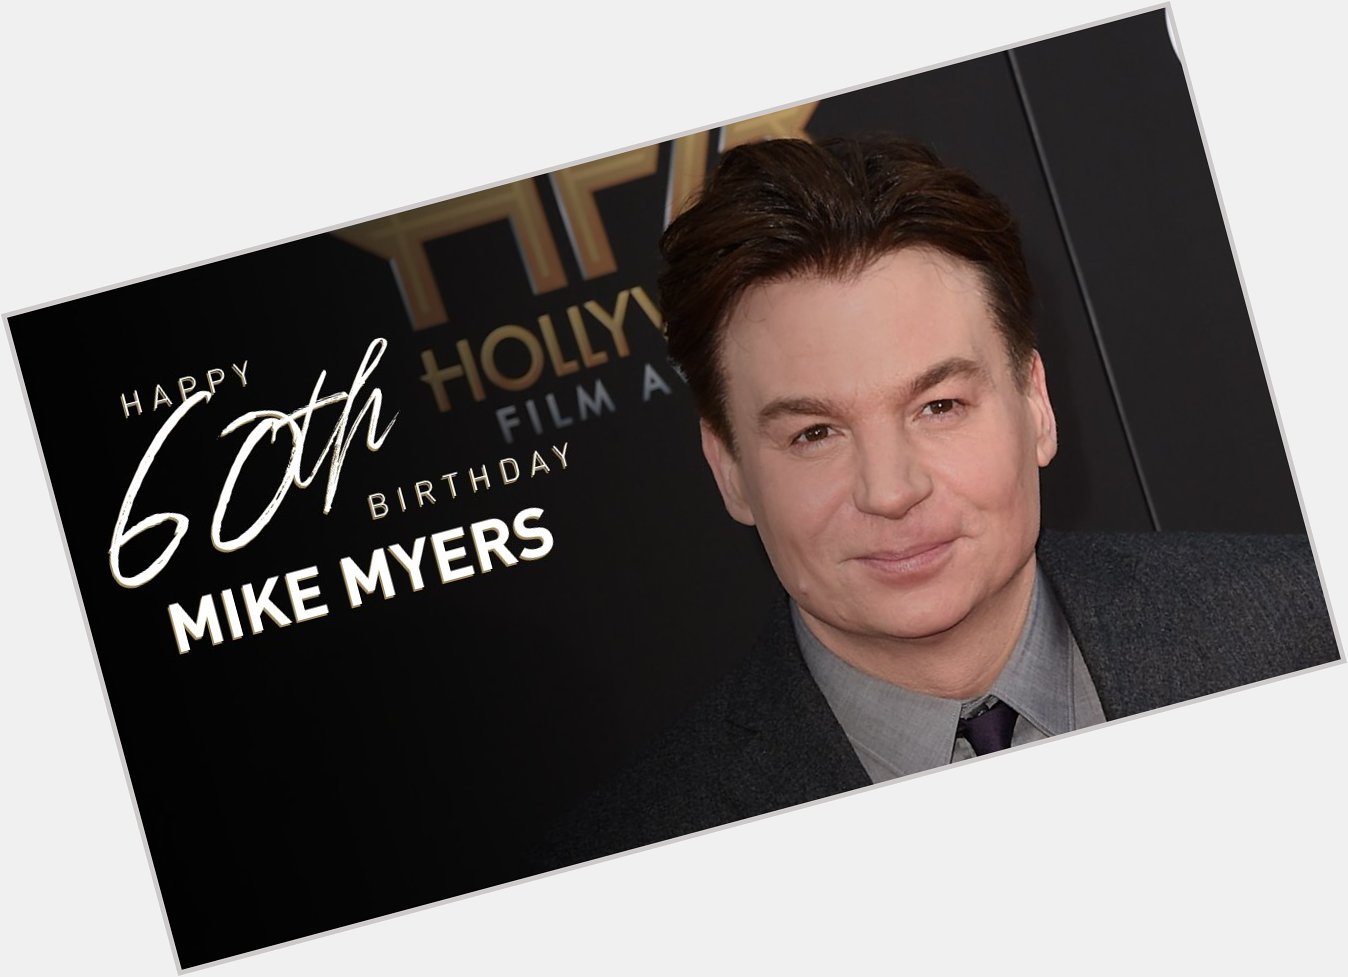 Happy 60th birthday Mike Myers! 